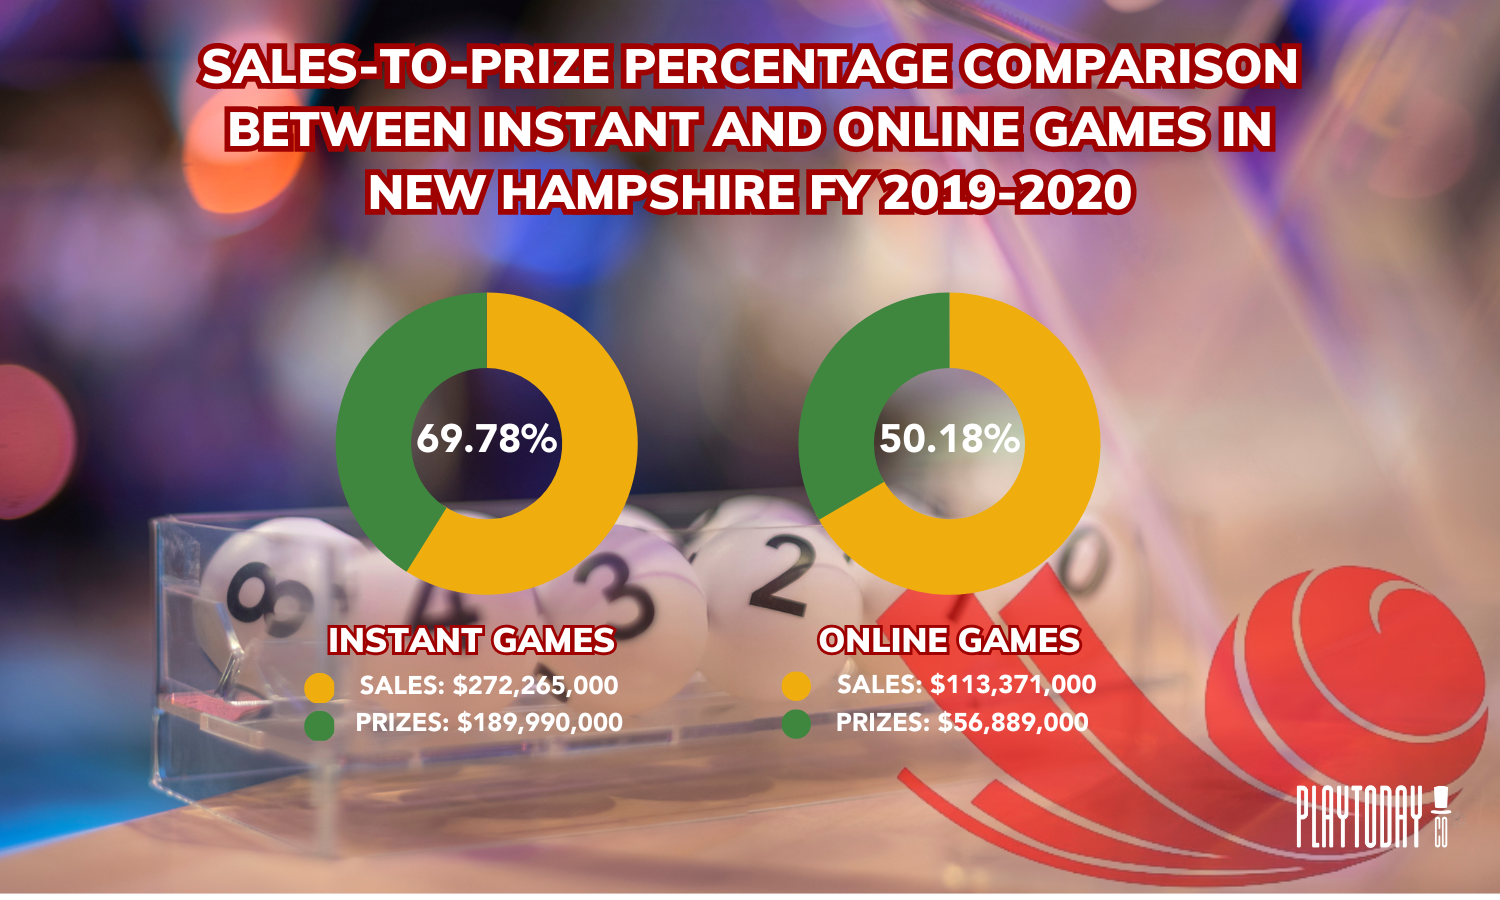 Sales-to-prize percentage comparison between instant and online games in New Hampshire FY 2019-2020